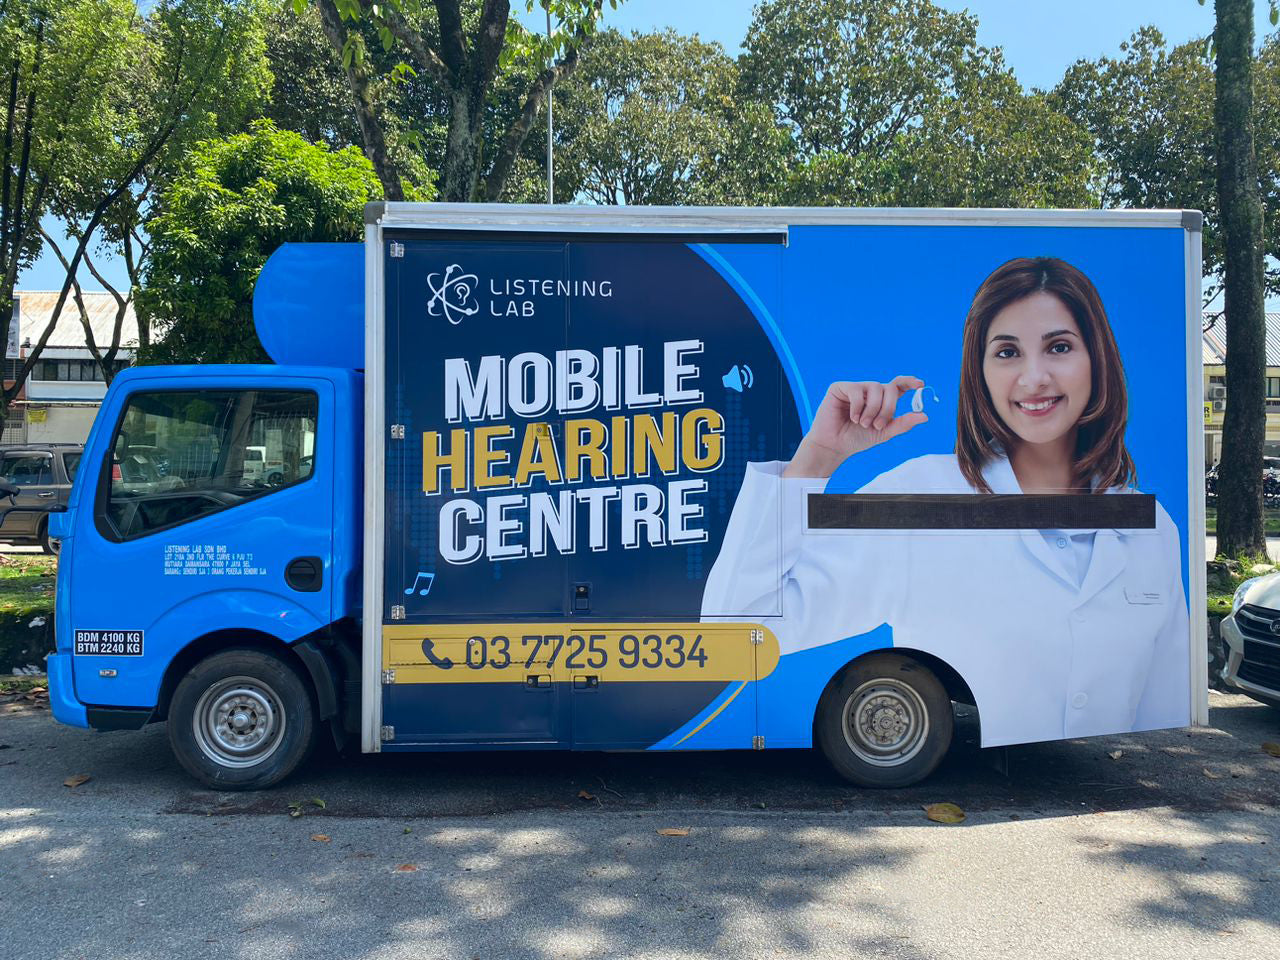 Mobile hearing centre